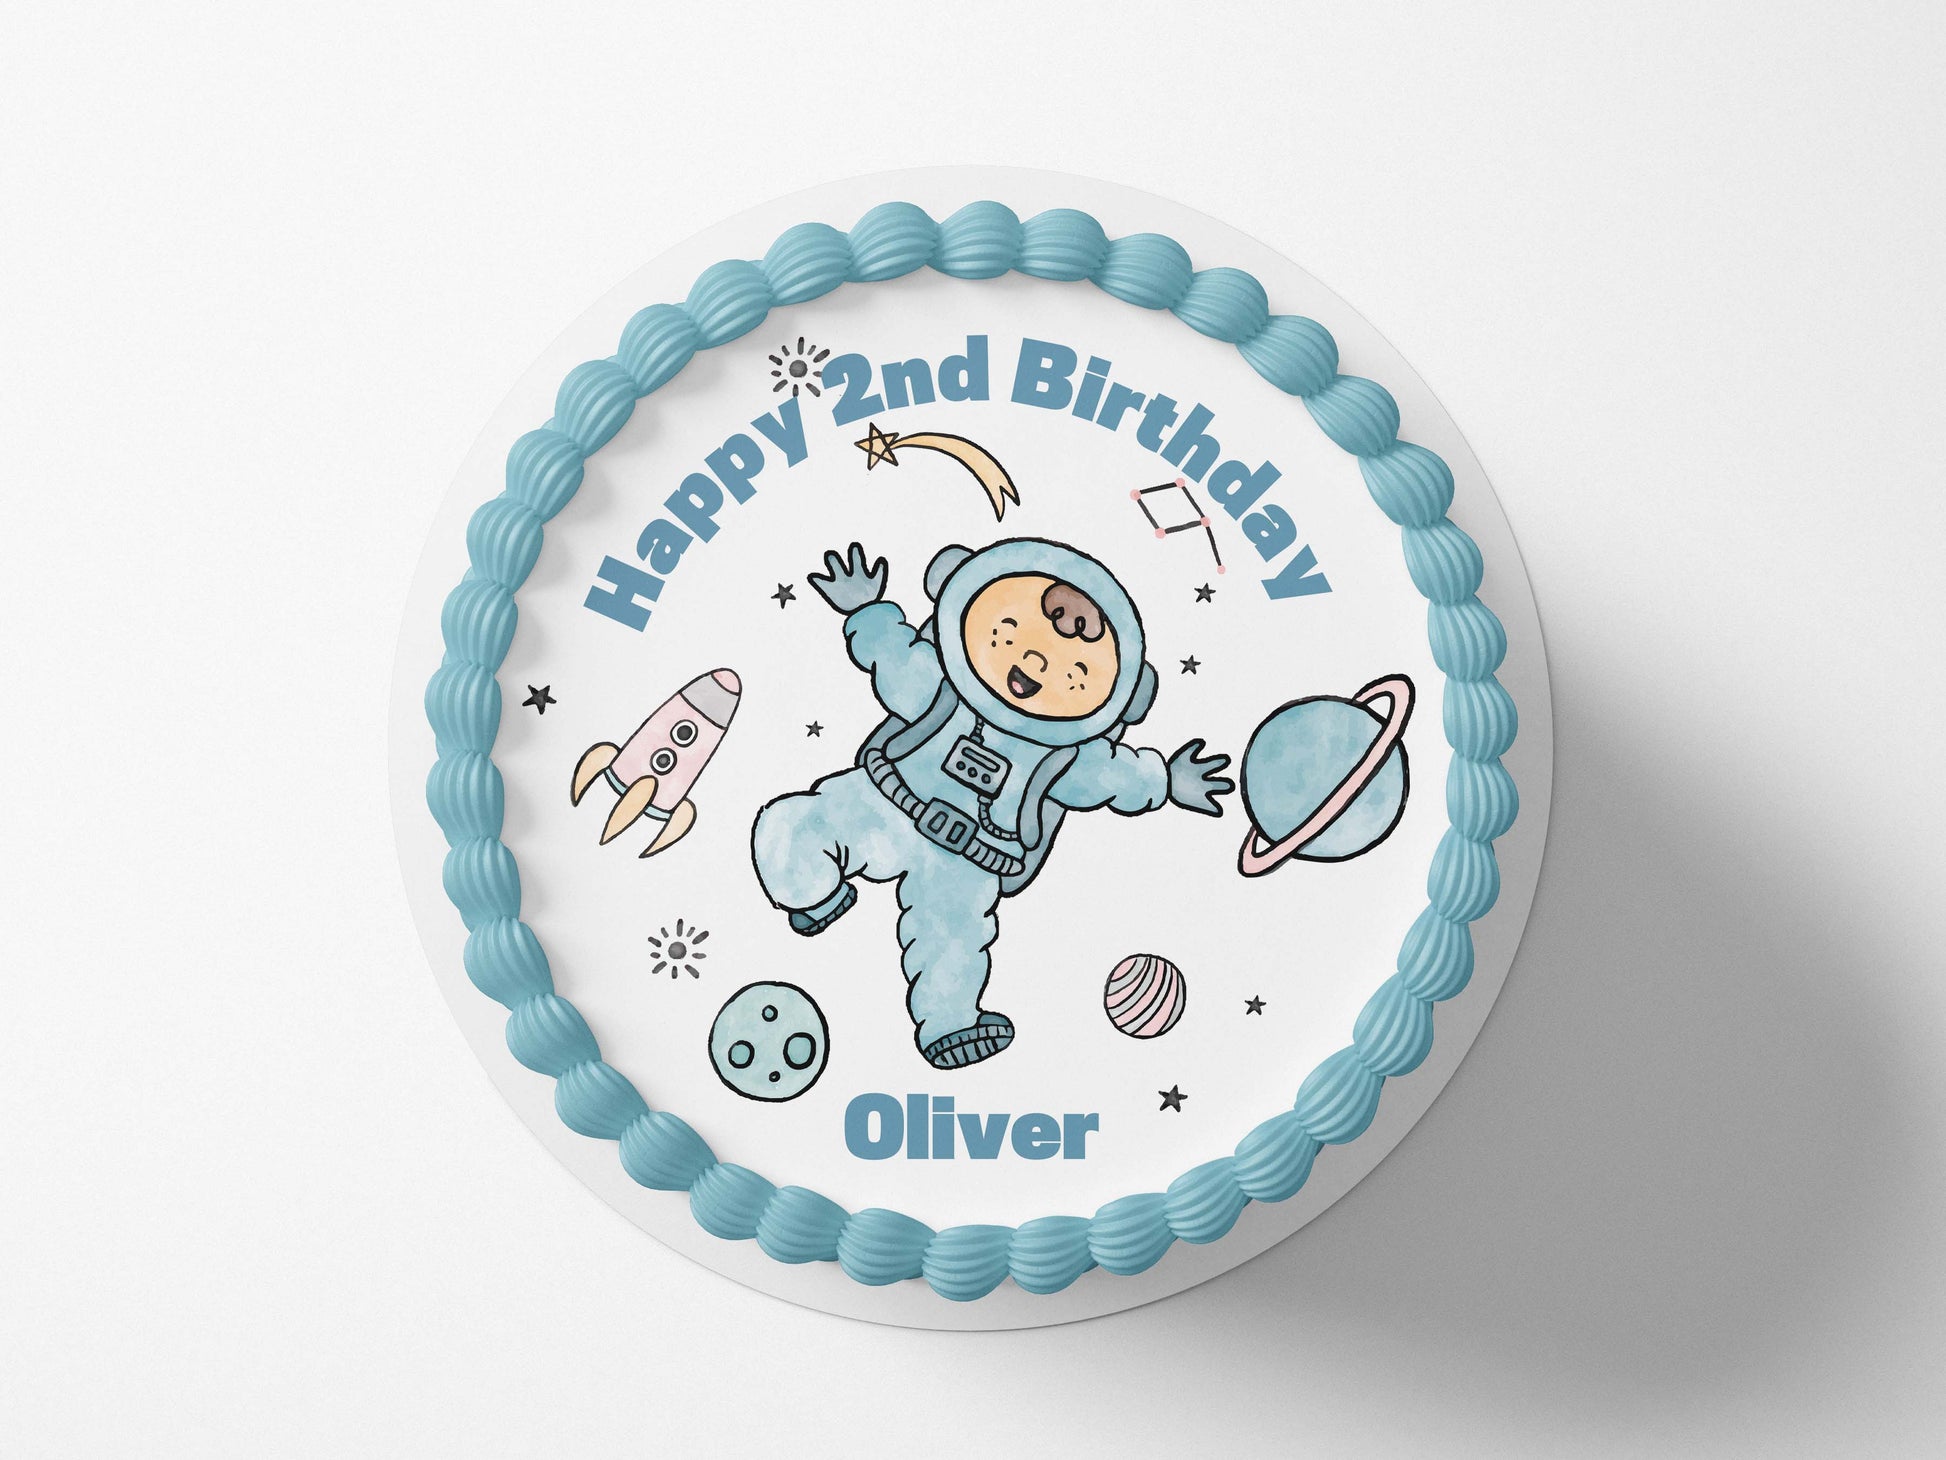 Outer Space - Edible Icing Toppers Edible Cake Topper, Edible Cake Image, ,printsoncakes